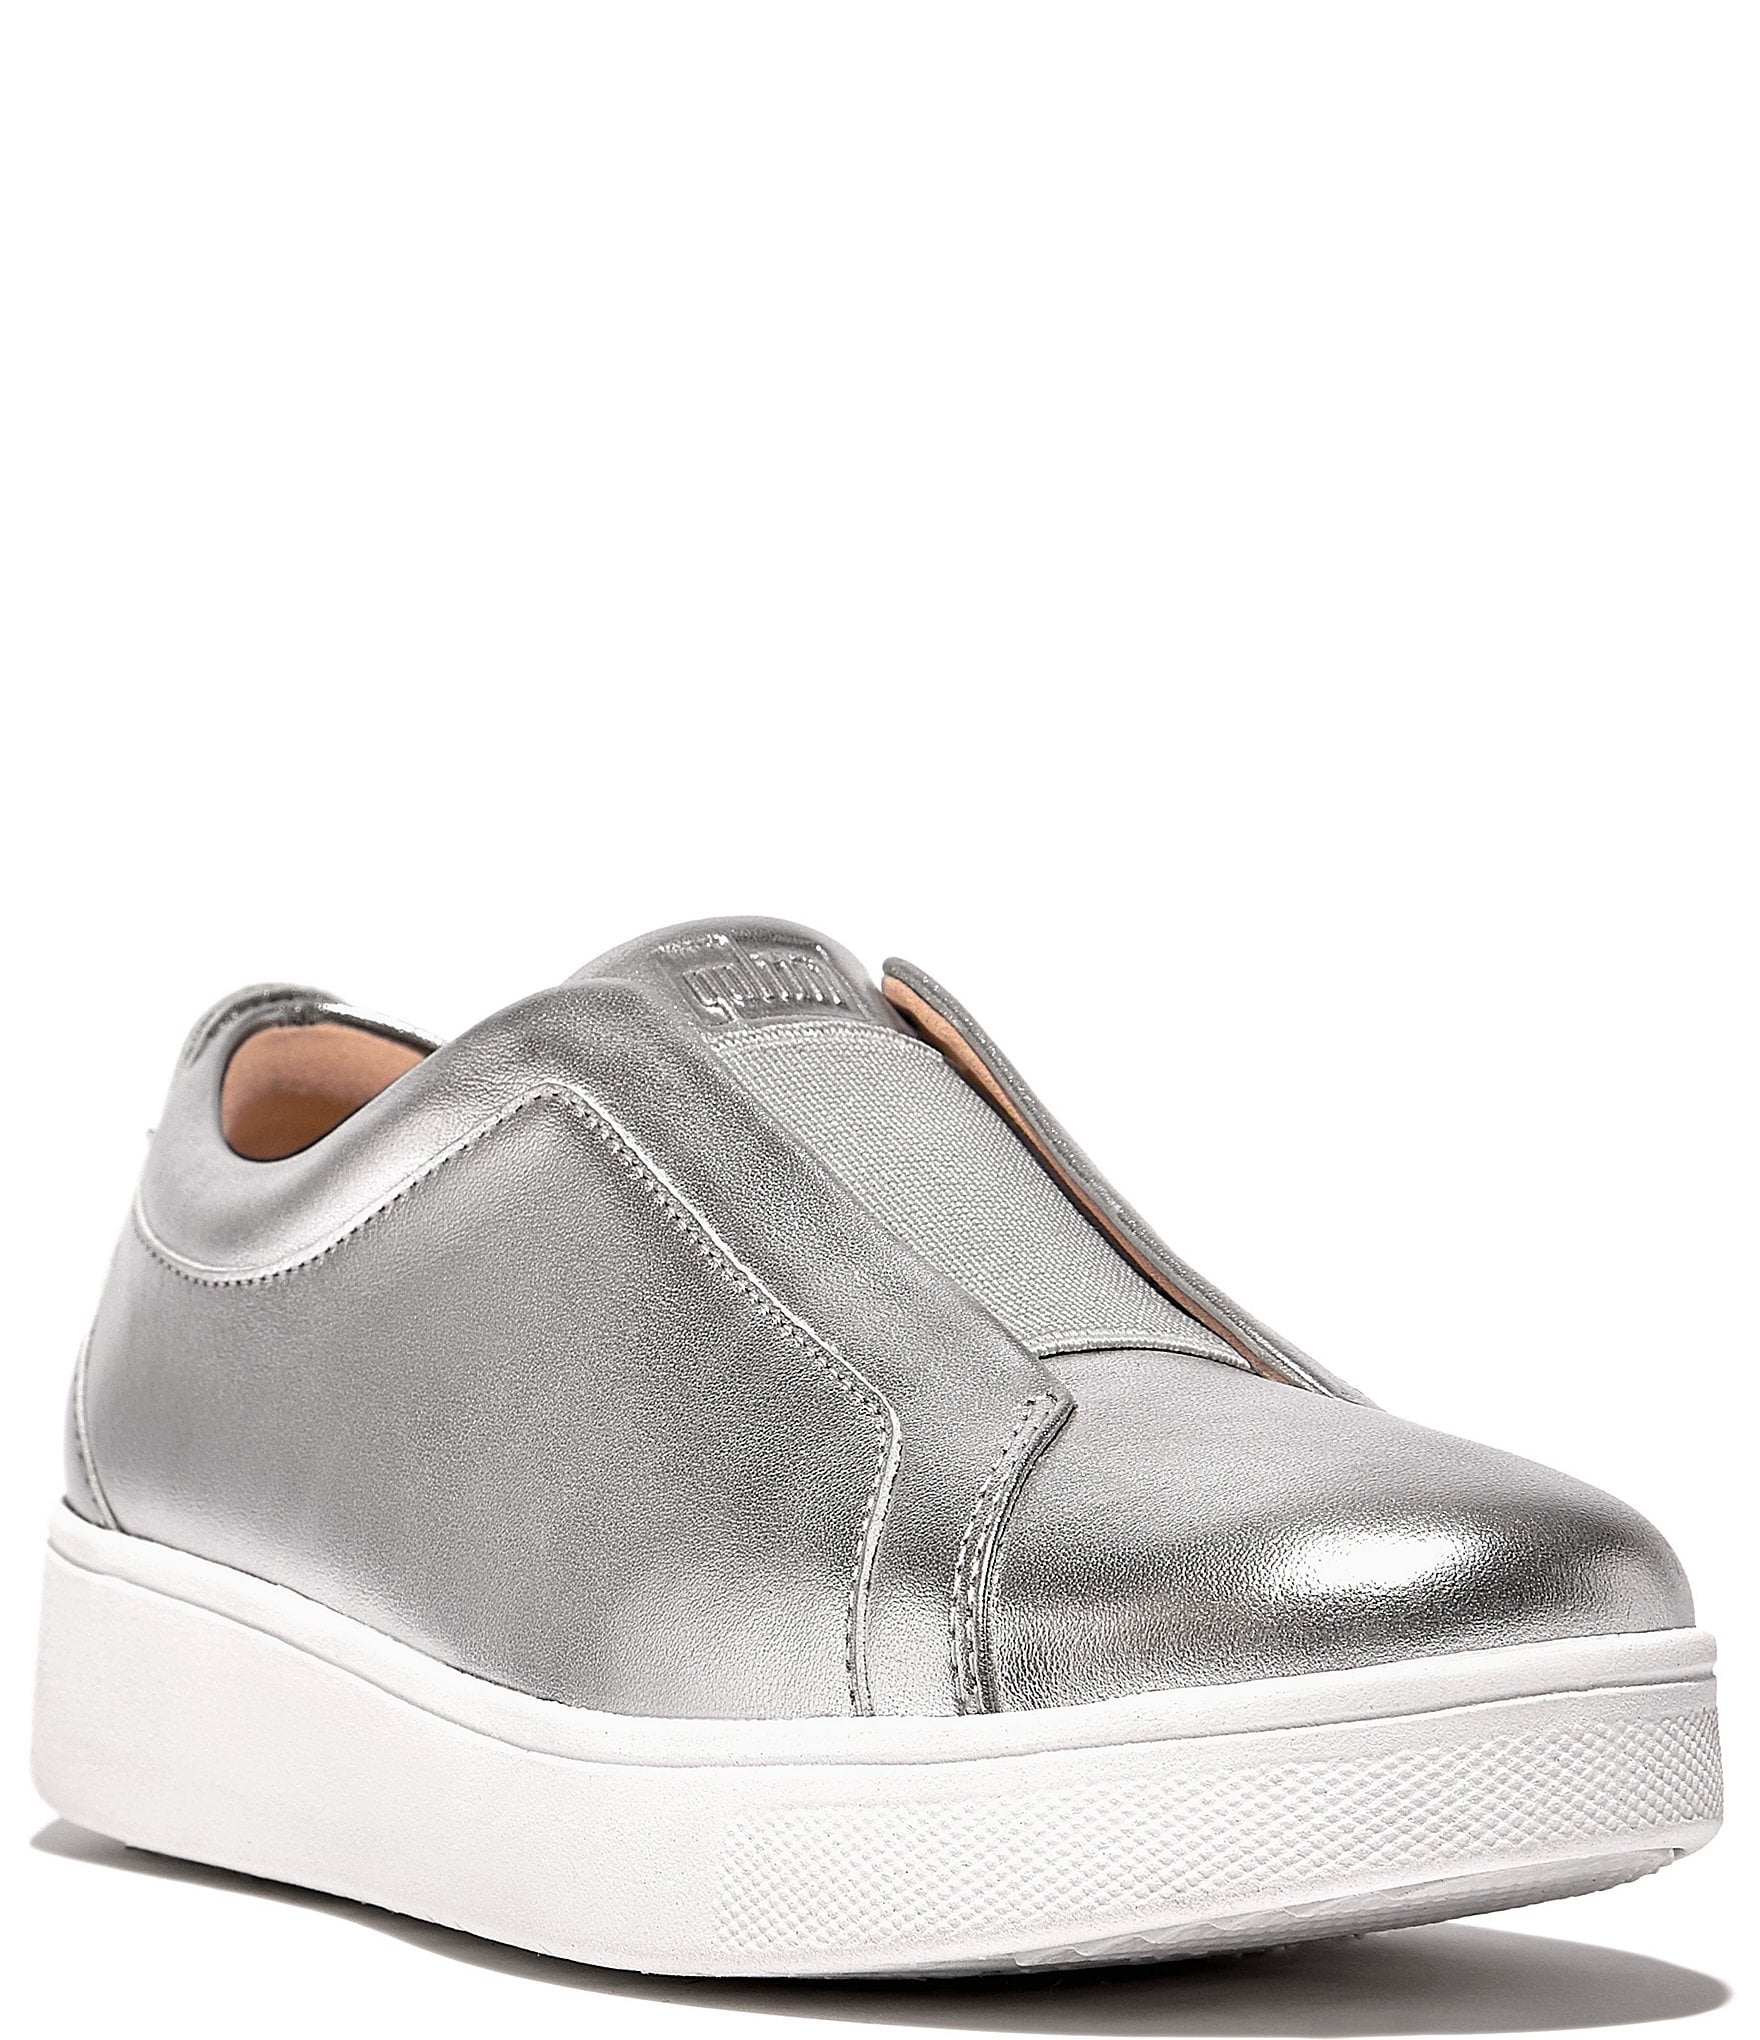 Silver Women's Sneakers & Athletic Shoes